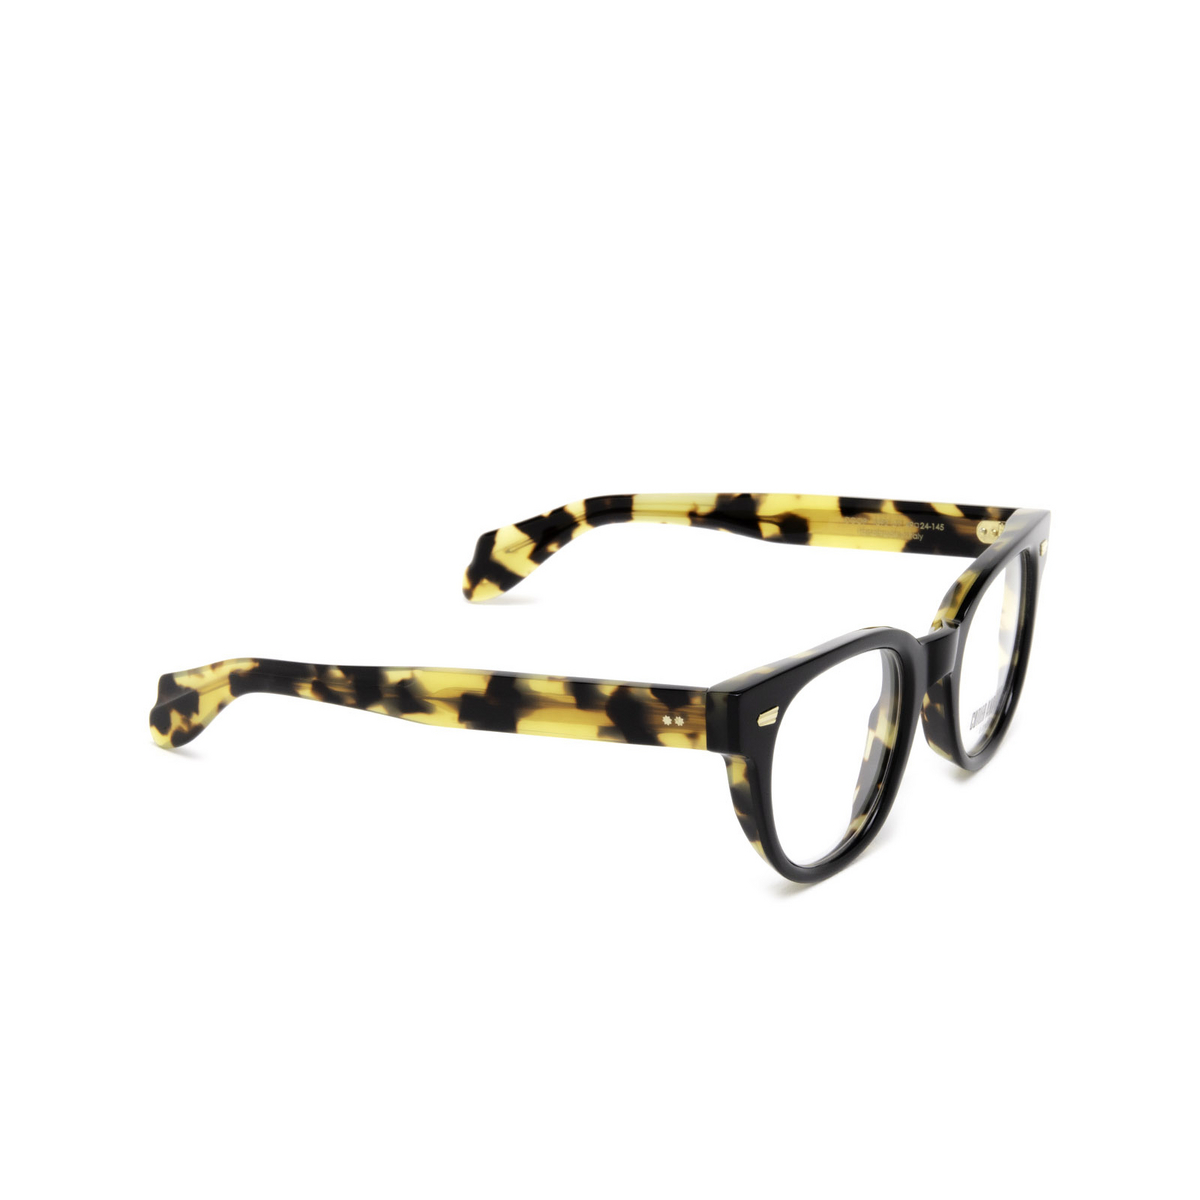 Cutler and Gross 1392 Eyeglasses 01 Black on Camo - three-quarters view